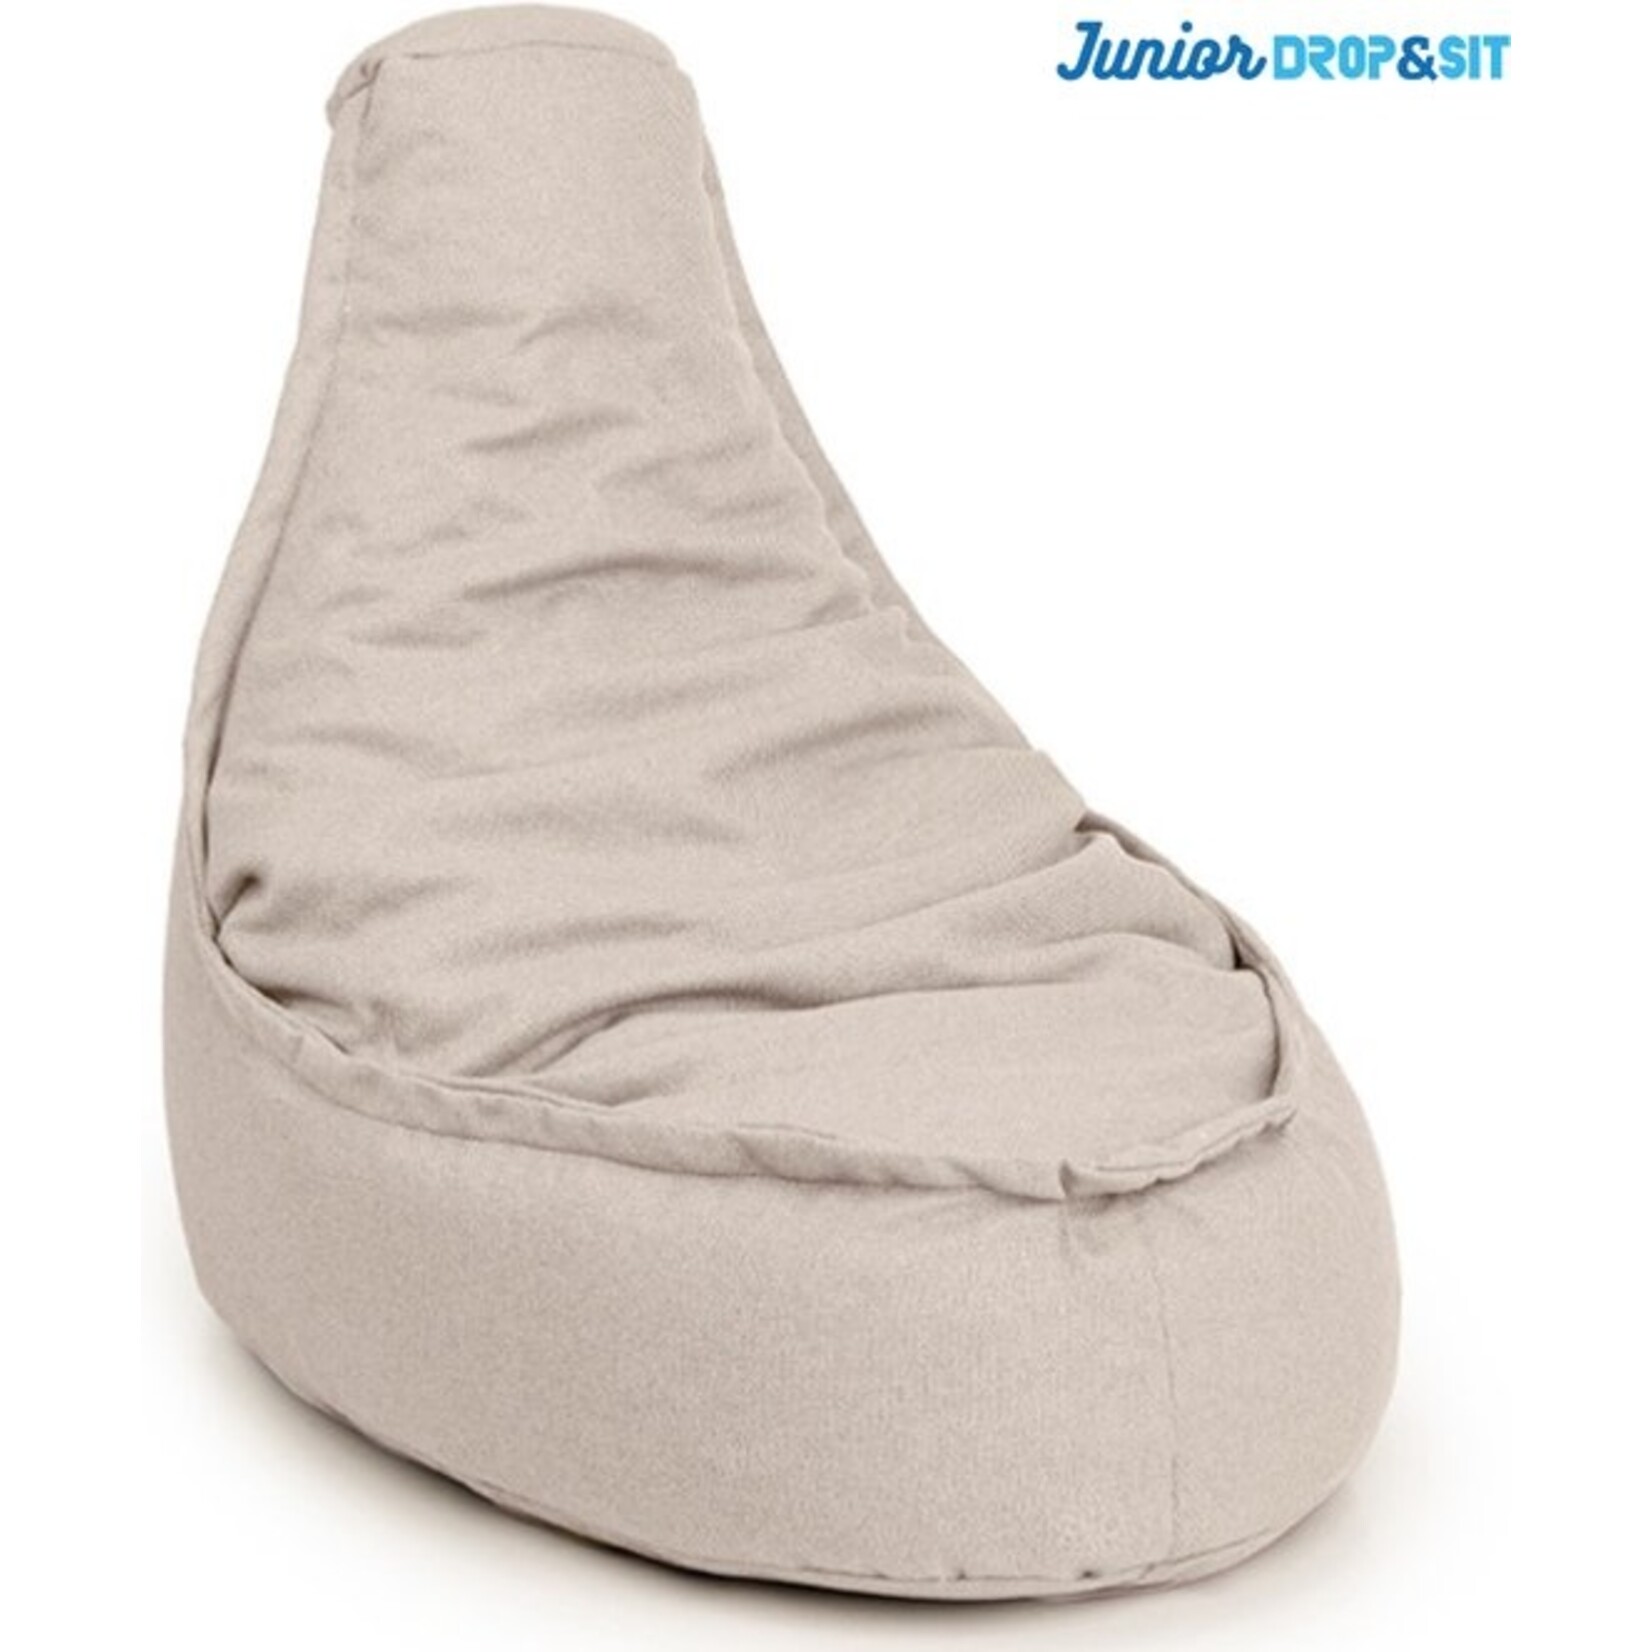 Drop & Sit - Beanbag Chair Durable - 100% Recycled Petbottles - Beige - Junior - For Indoors and Outdoors